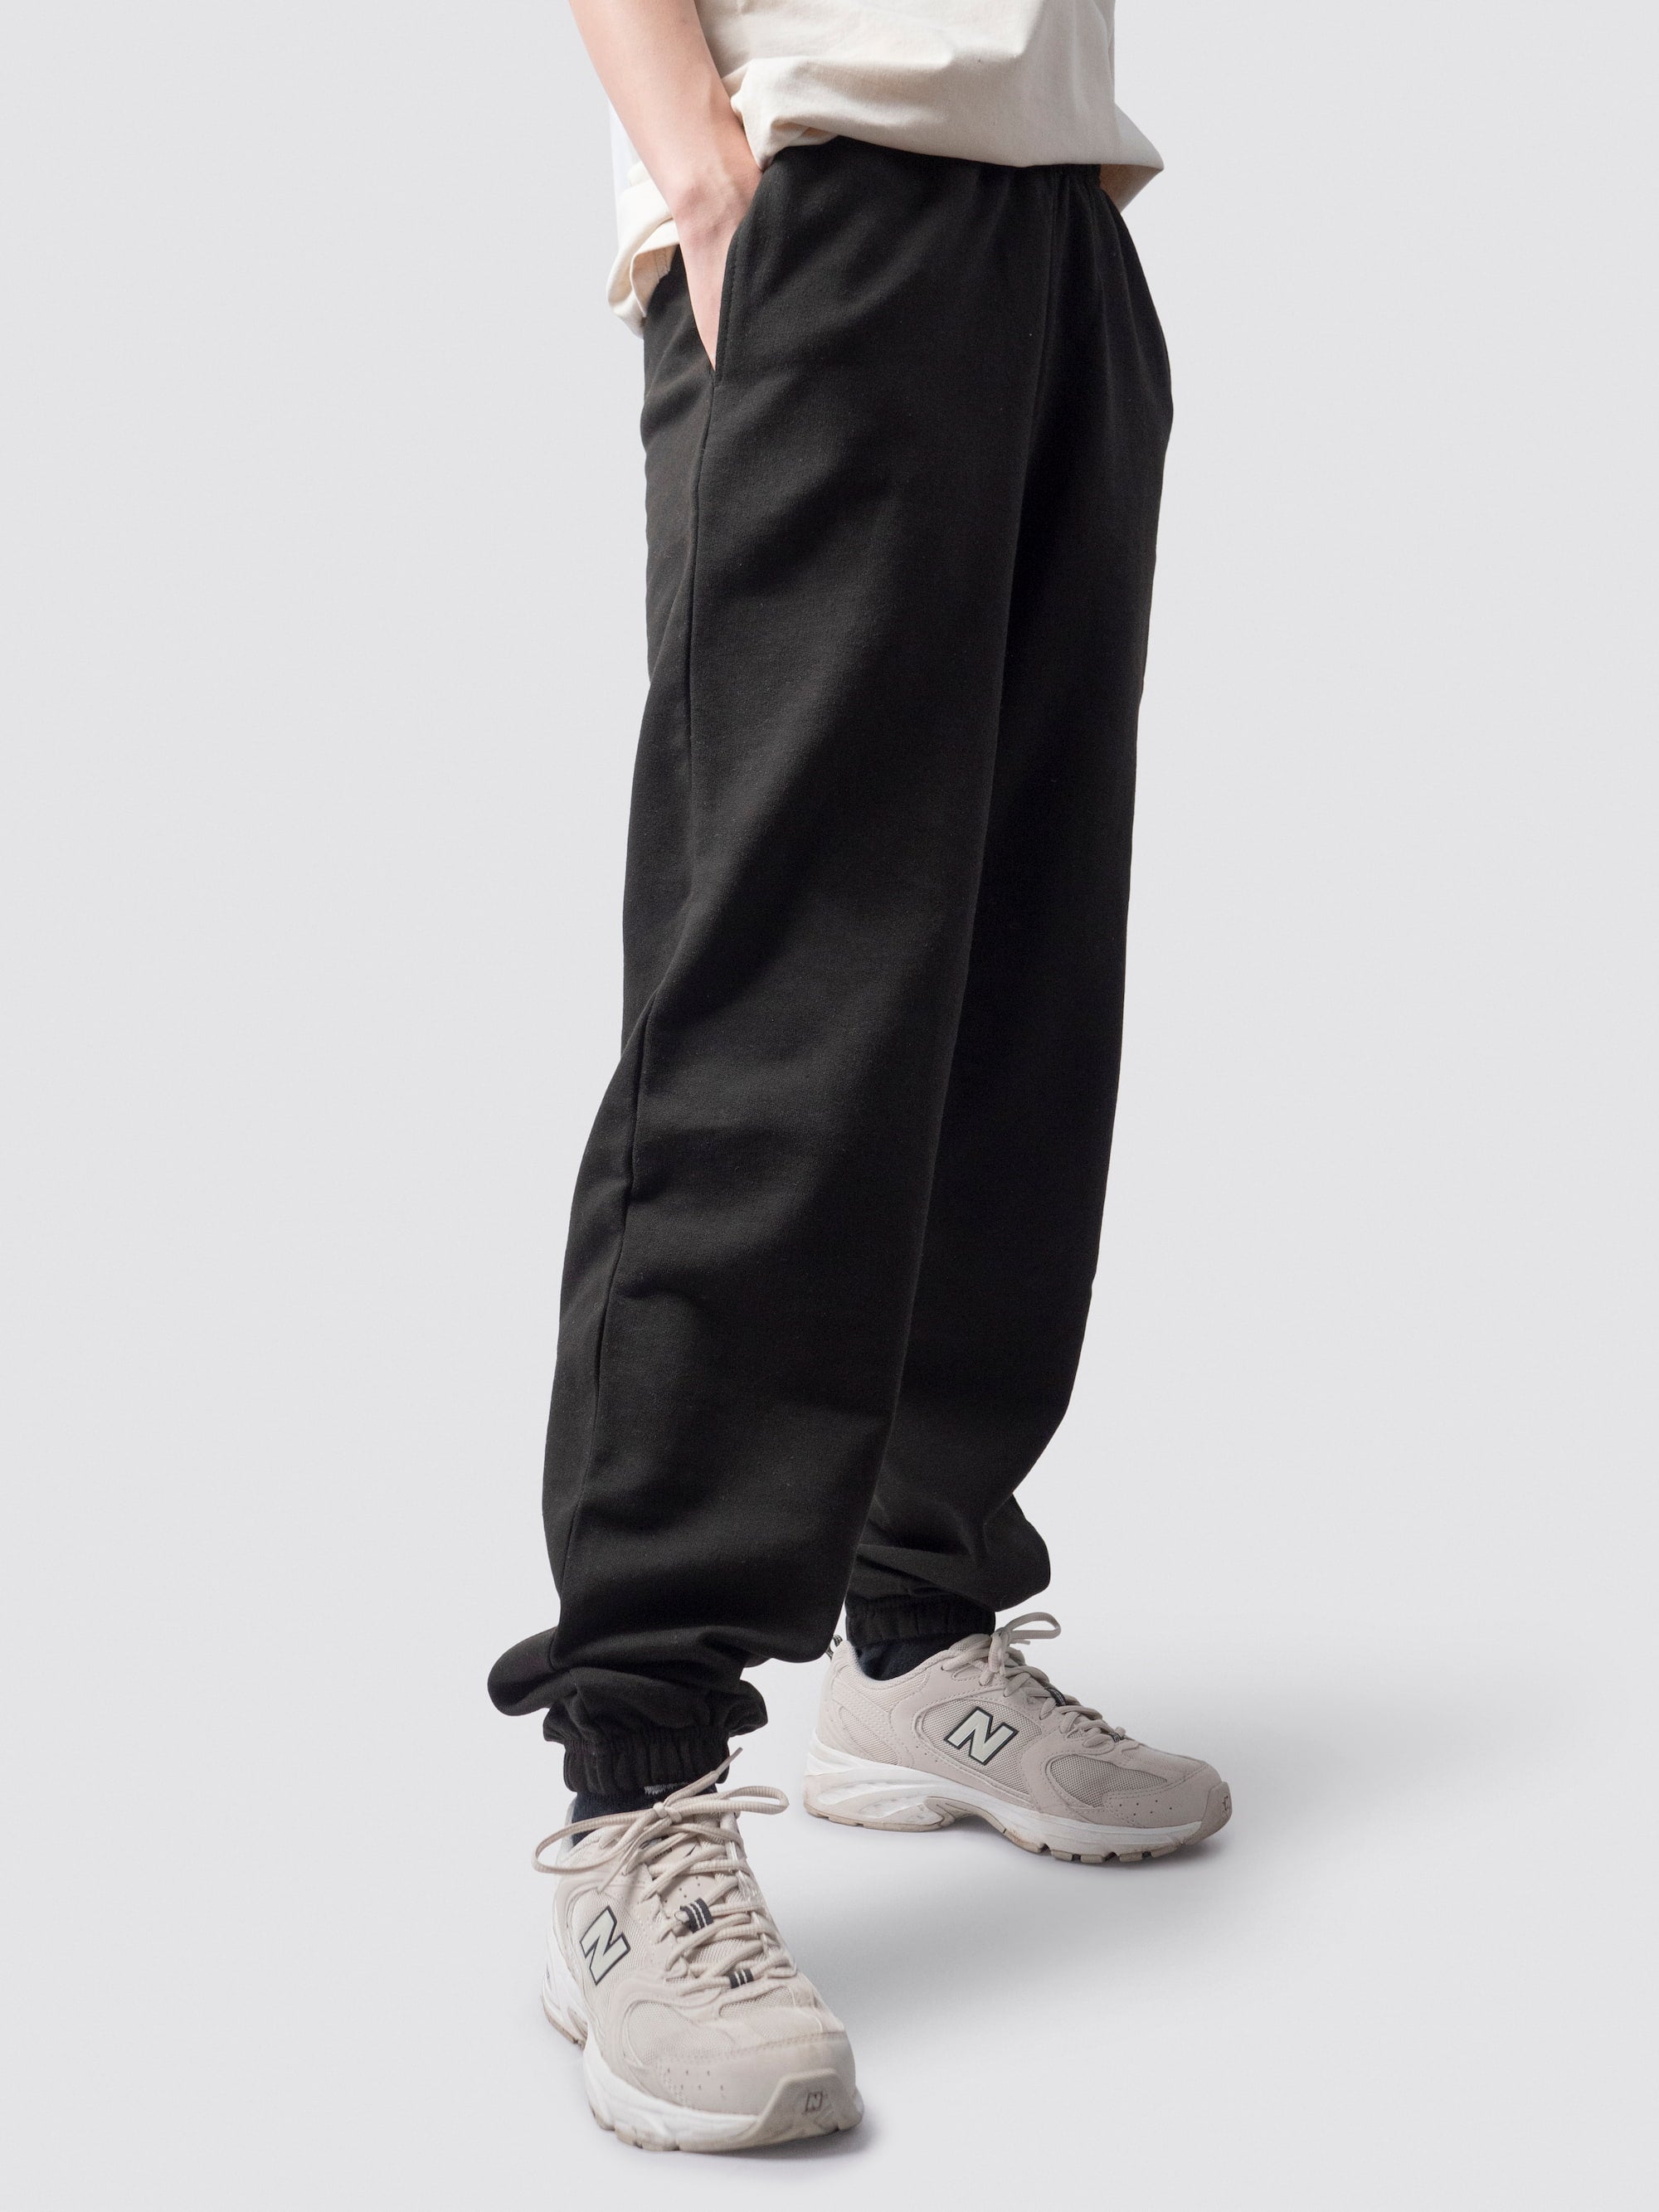 Black, university jogging bottoms with personalised name or initials